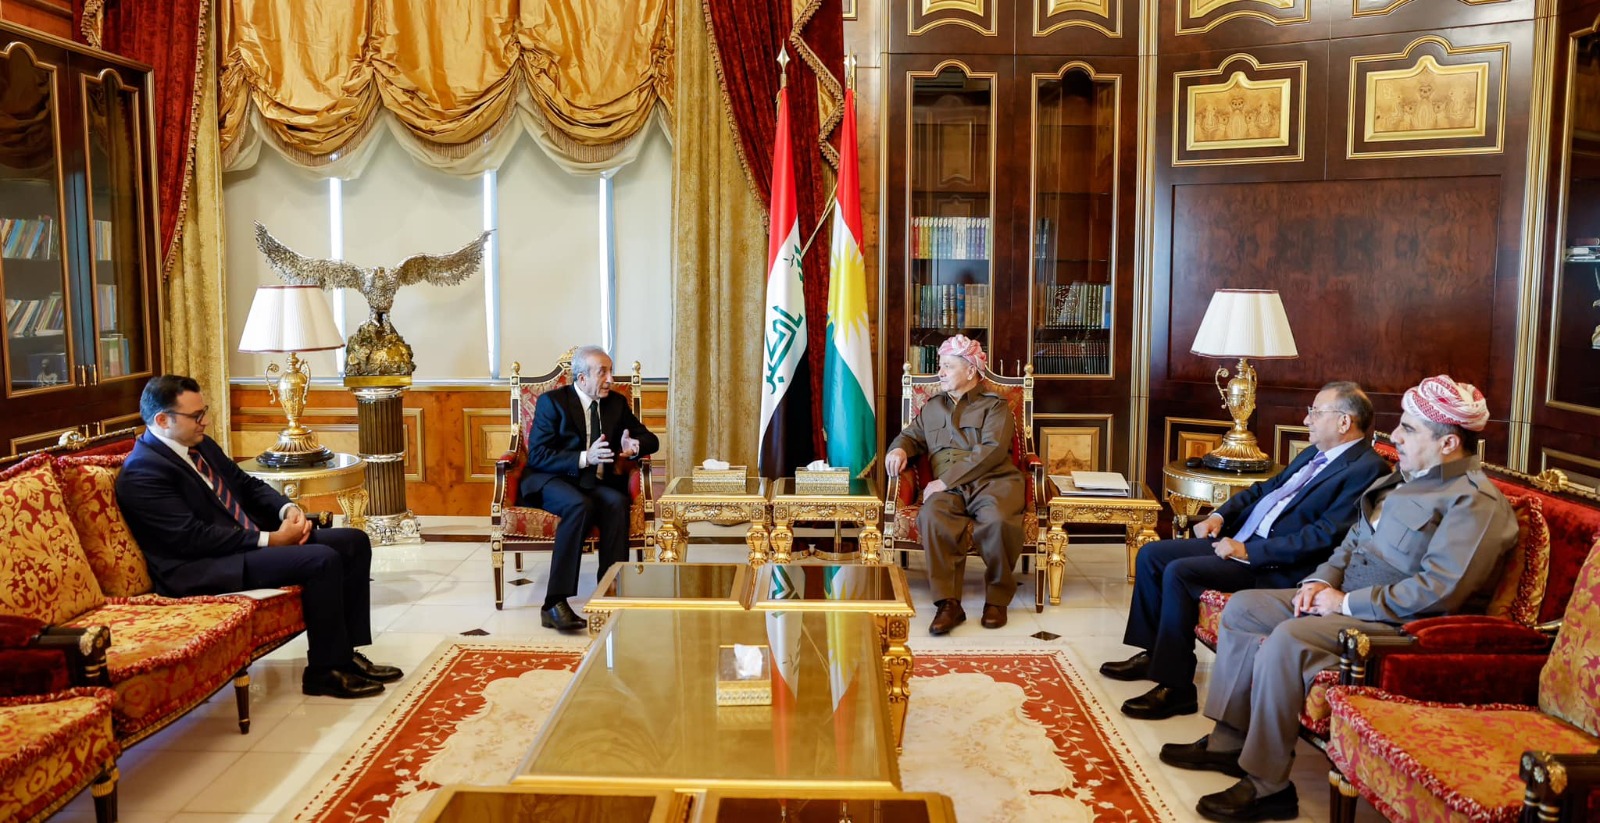 Kurdish Leader Barzani and Former Turkish Minister discuss regional situation and bilateral ties